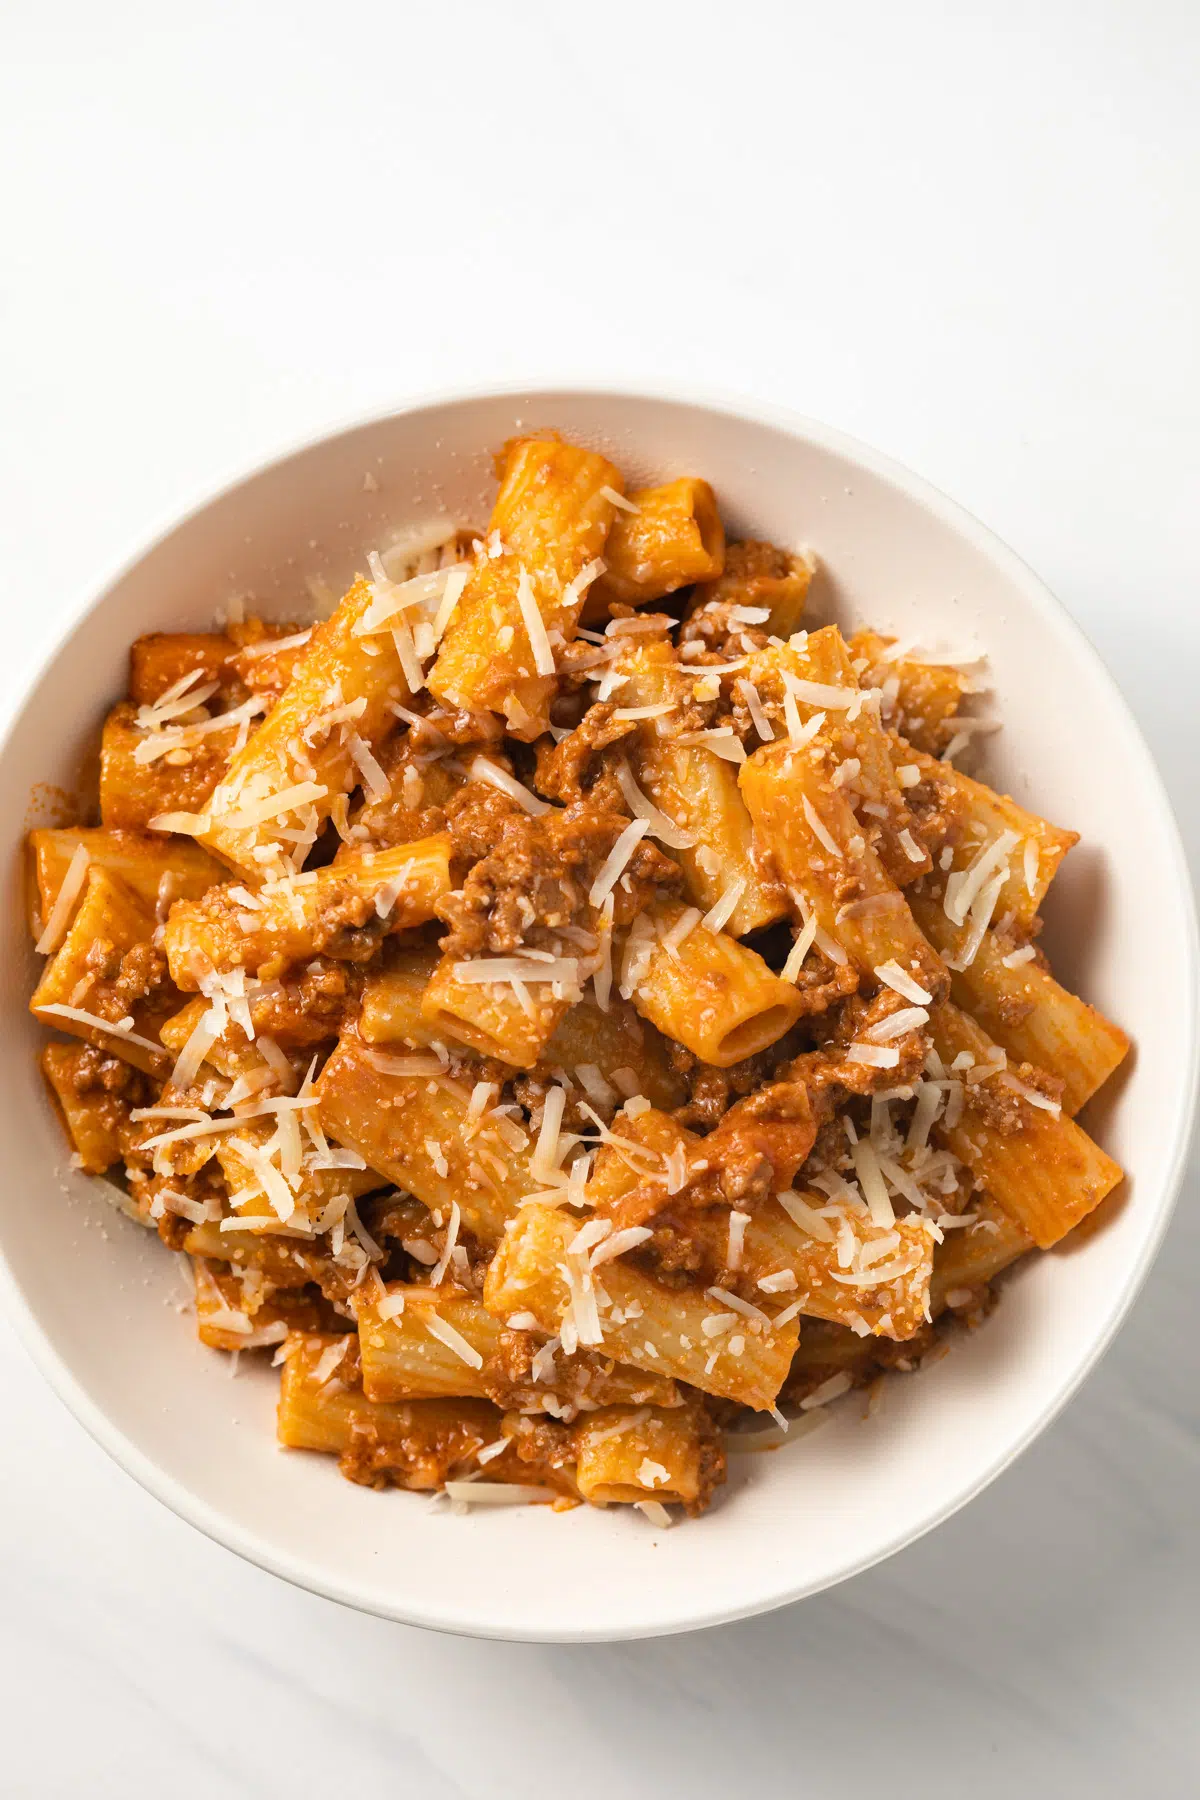 Rigatoni coated in bolognese meat sauce.